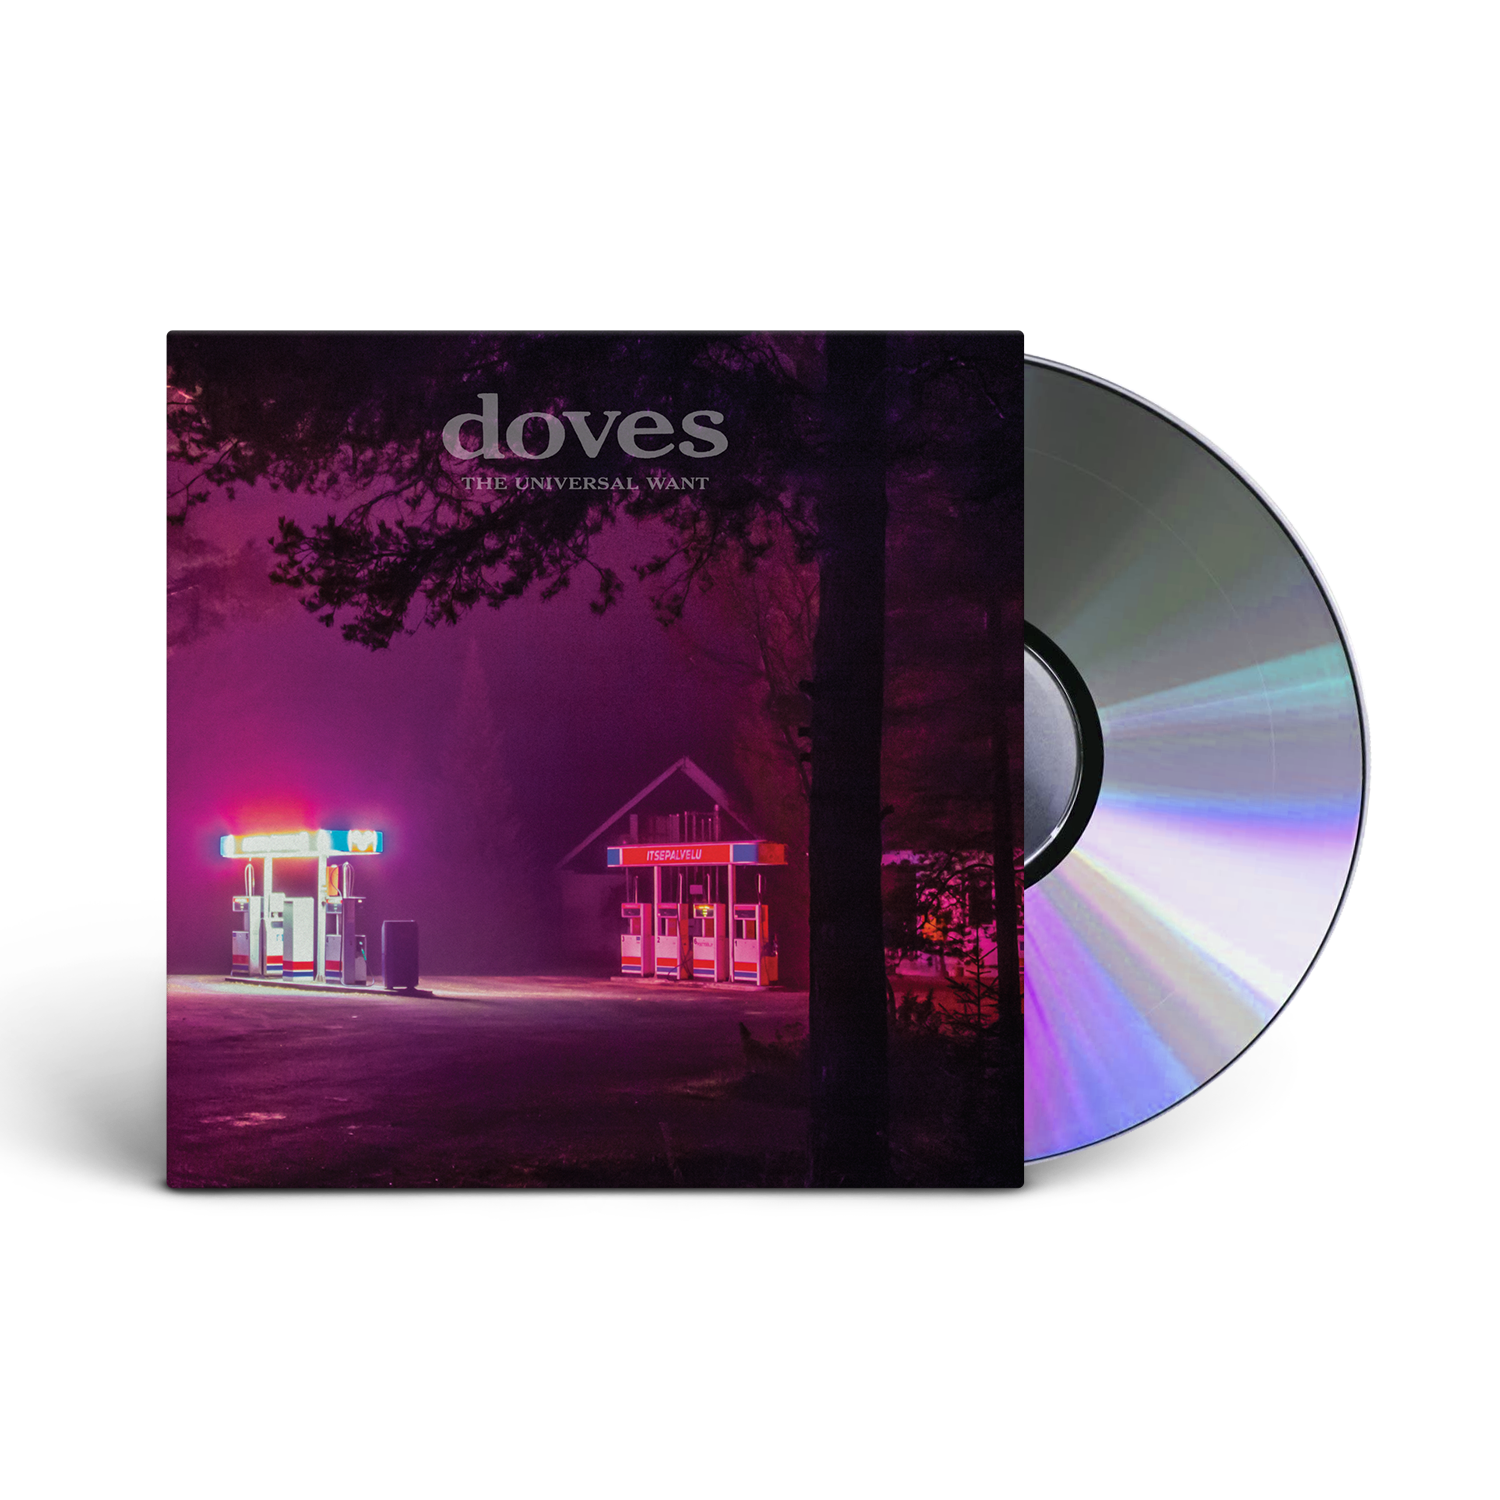 Doves - The Universal Want: CD